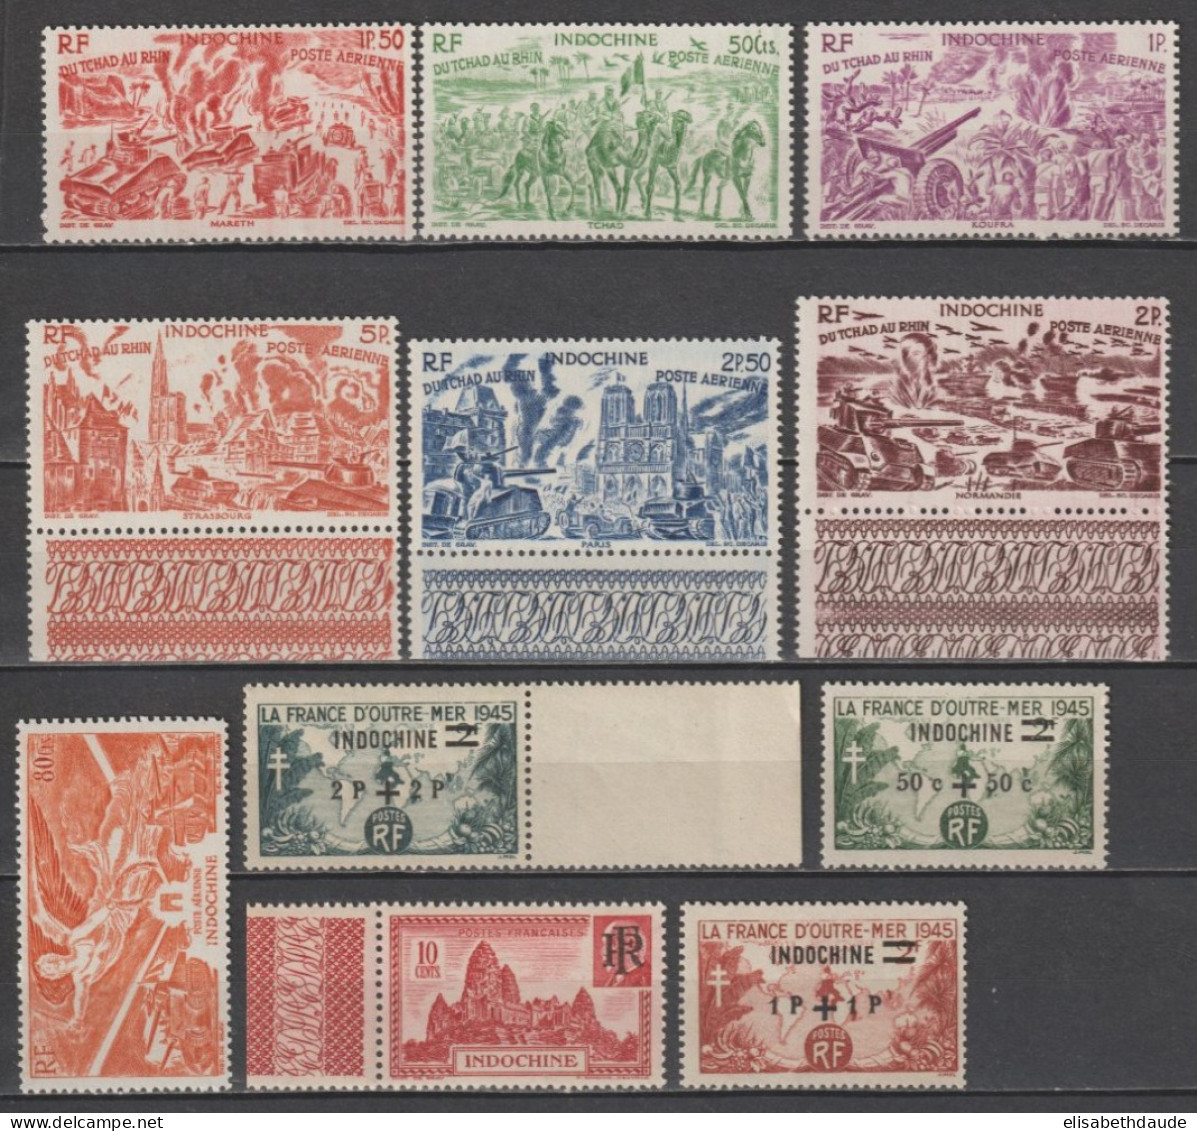 INDOCHINE - 1945/1946 - ANNEES COMPLETES AVEC POSTE AERIENNE YVERT N° 296/299 + A39/45 ** MNH - COTE = 21.5 EUR - Unused Stamps